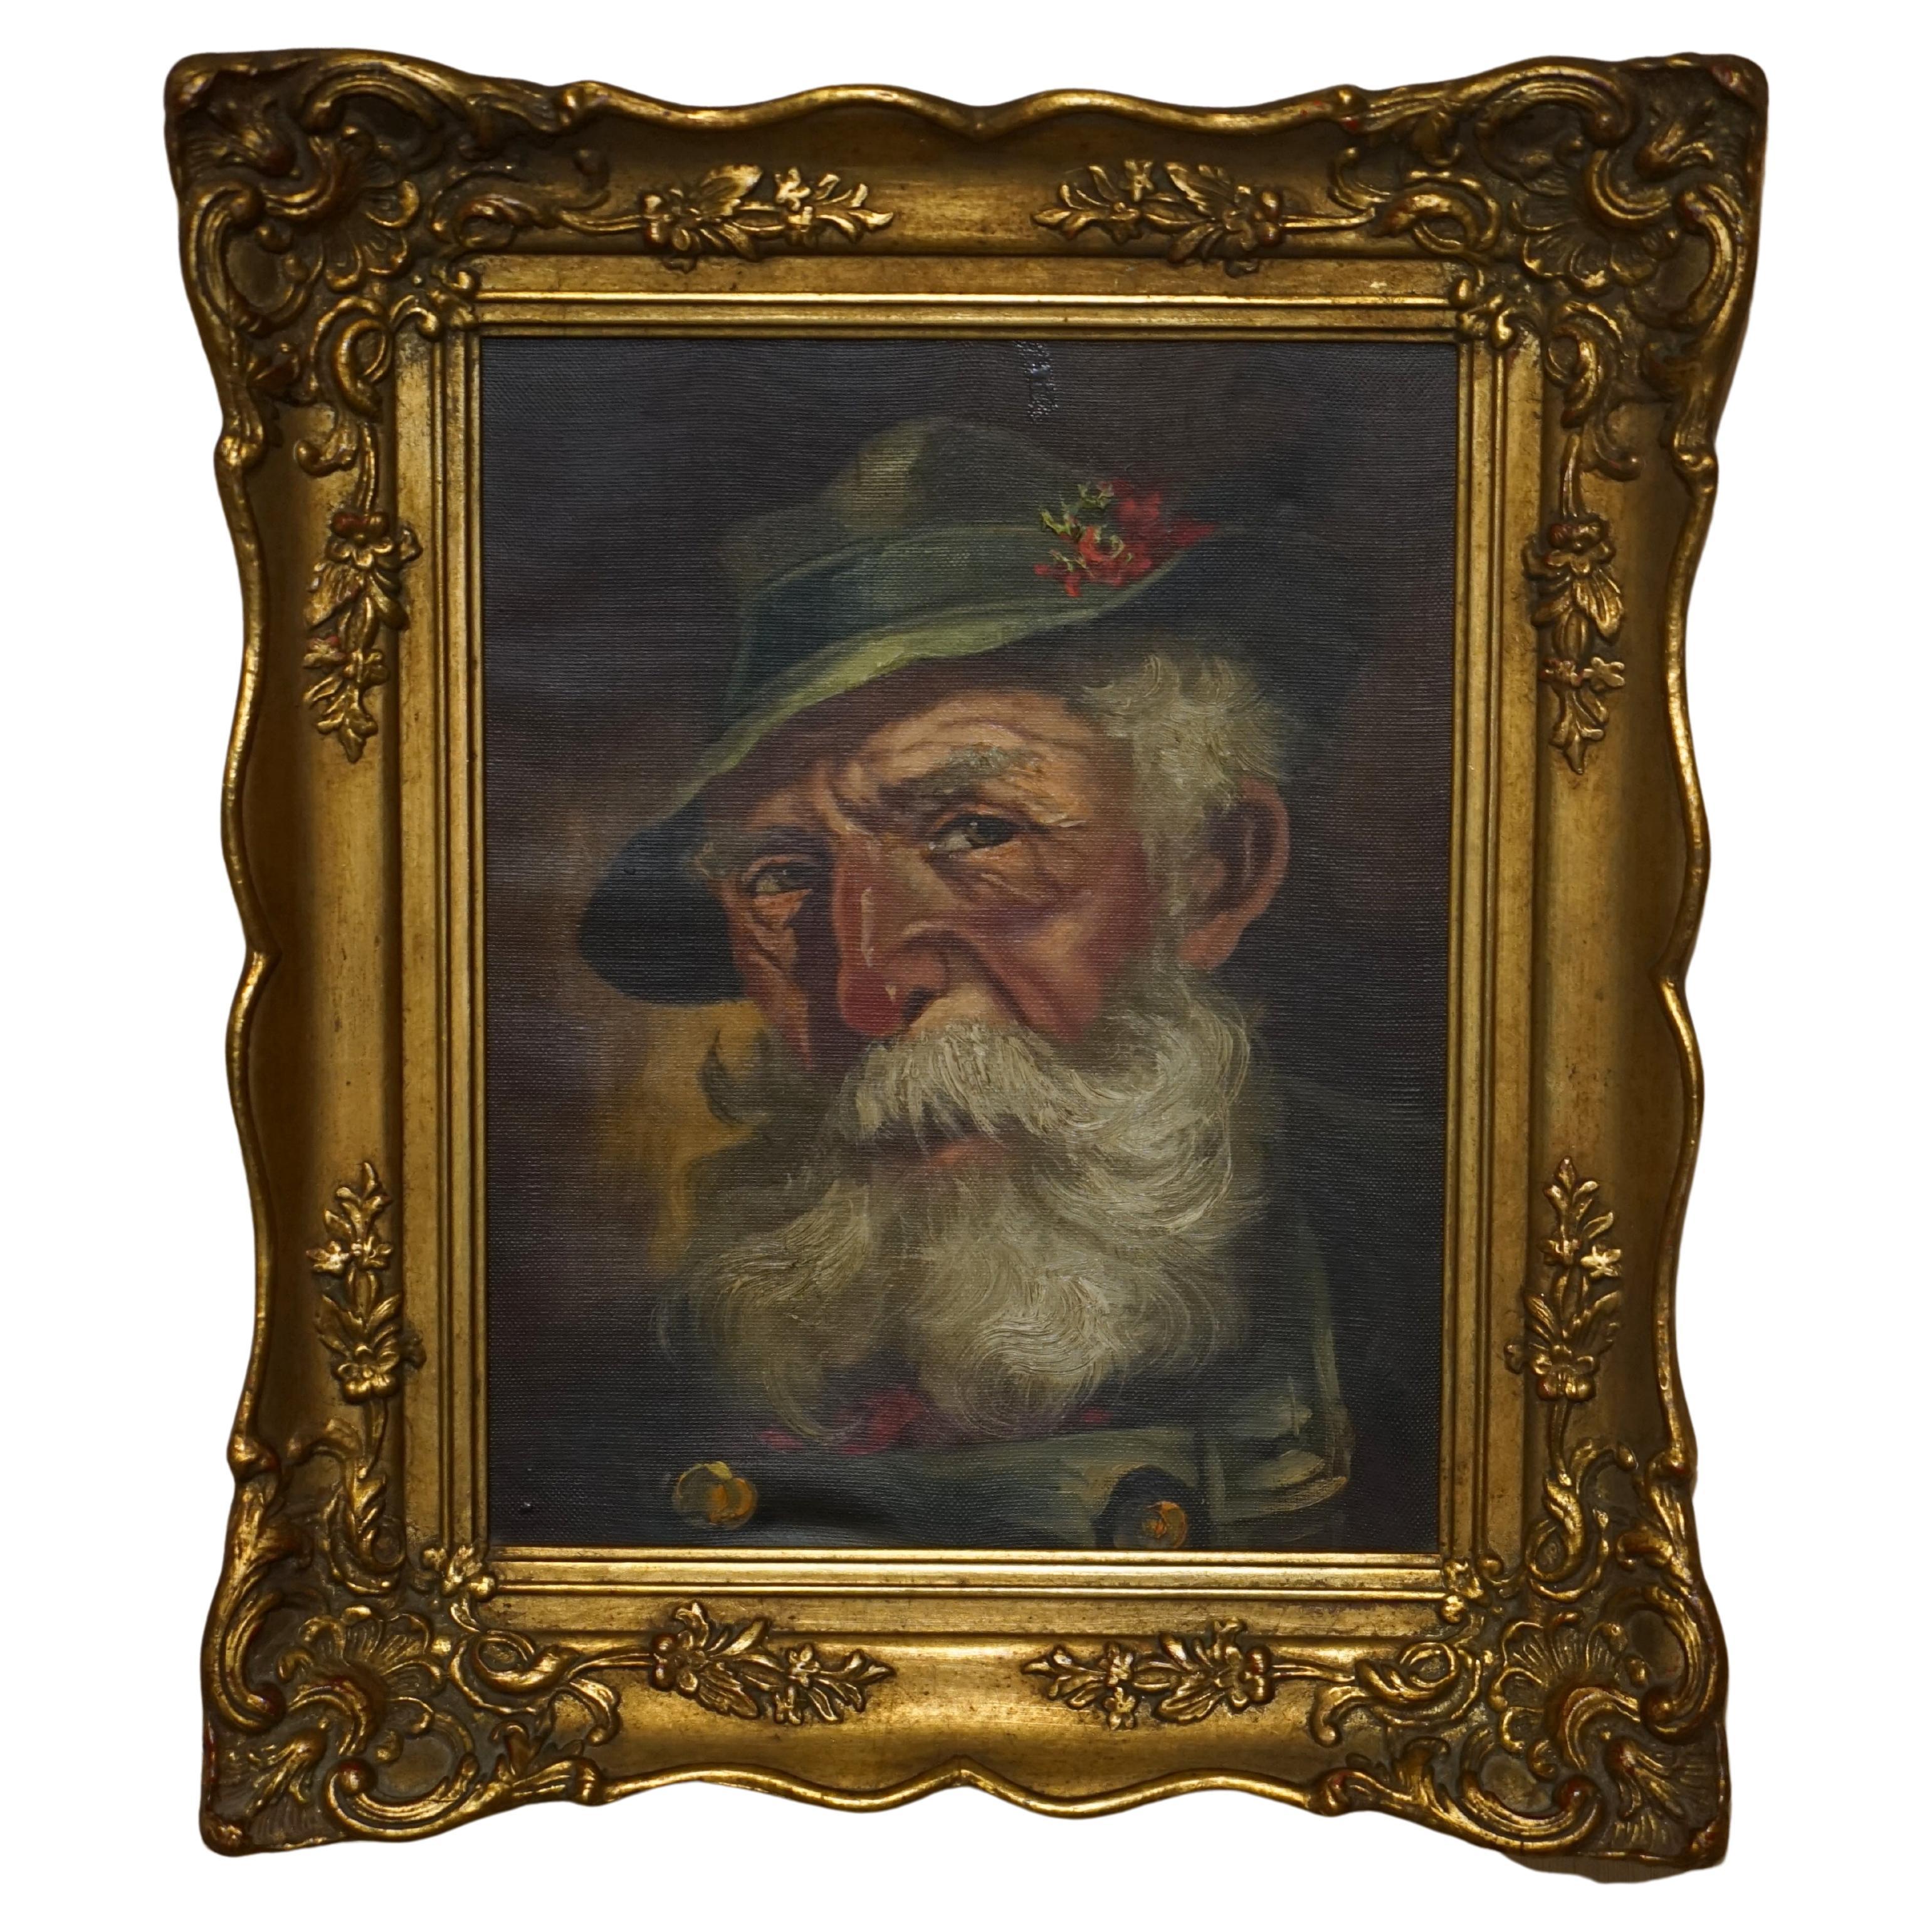 Antique Signed Dutch Oil on Canvas Painting of Old Man Man with Grey Hair & CAP